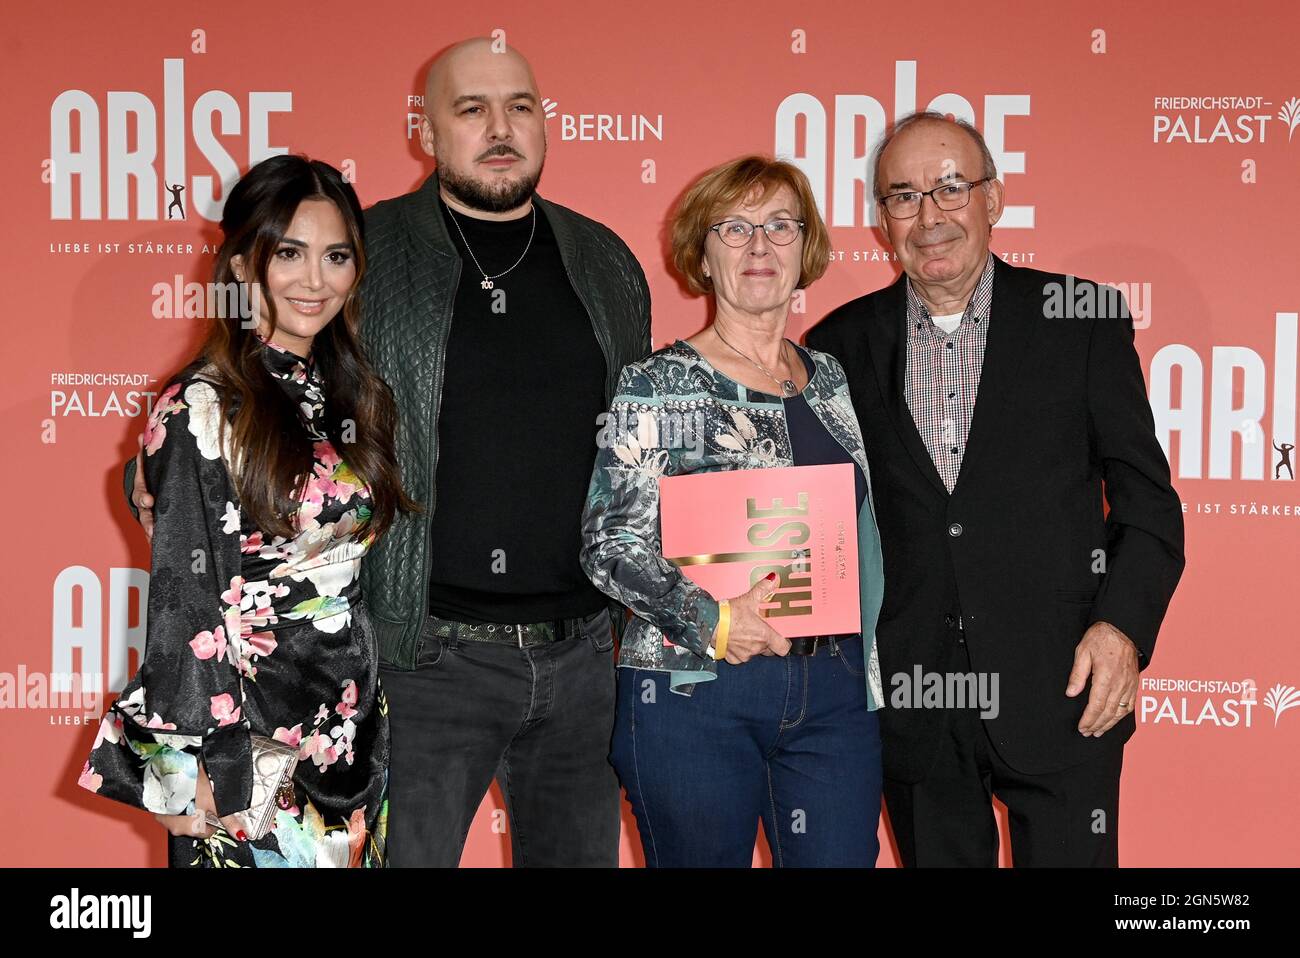 Berlin, Germany. 22nd Sep, 2021. Kool Savas and his wife Maria Yurderi and  his parents come to the premiere of the new show "Arise", in the  Friedrichstadt-Palast. Credit: Britta Pedersen/dpa-Zentralbild/dpa/Alamy  Live News